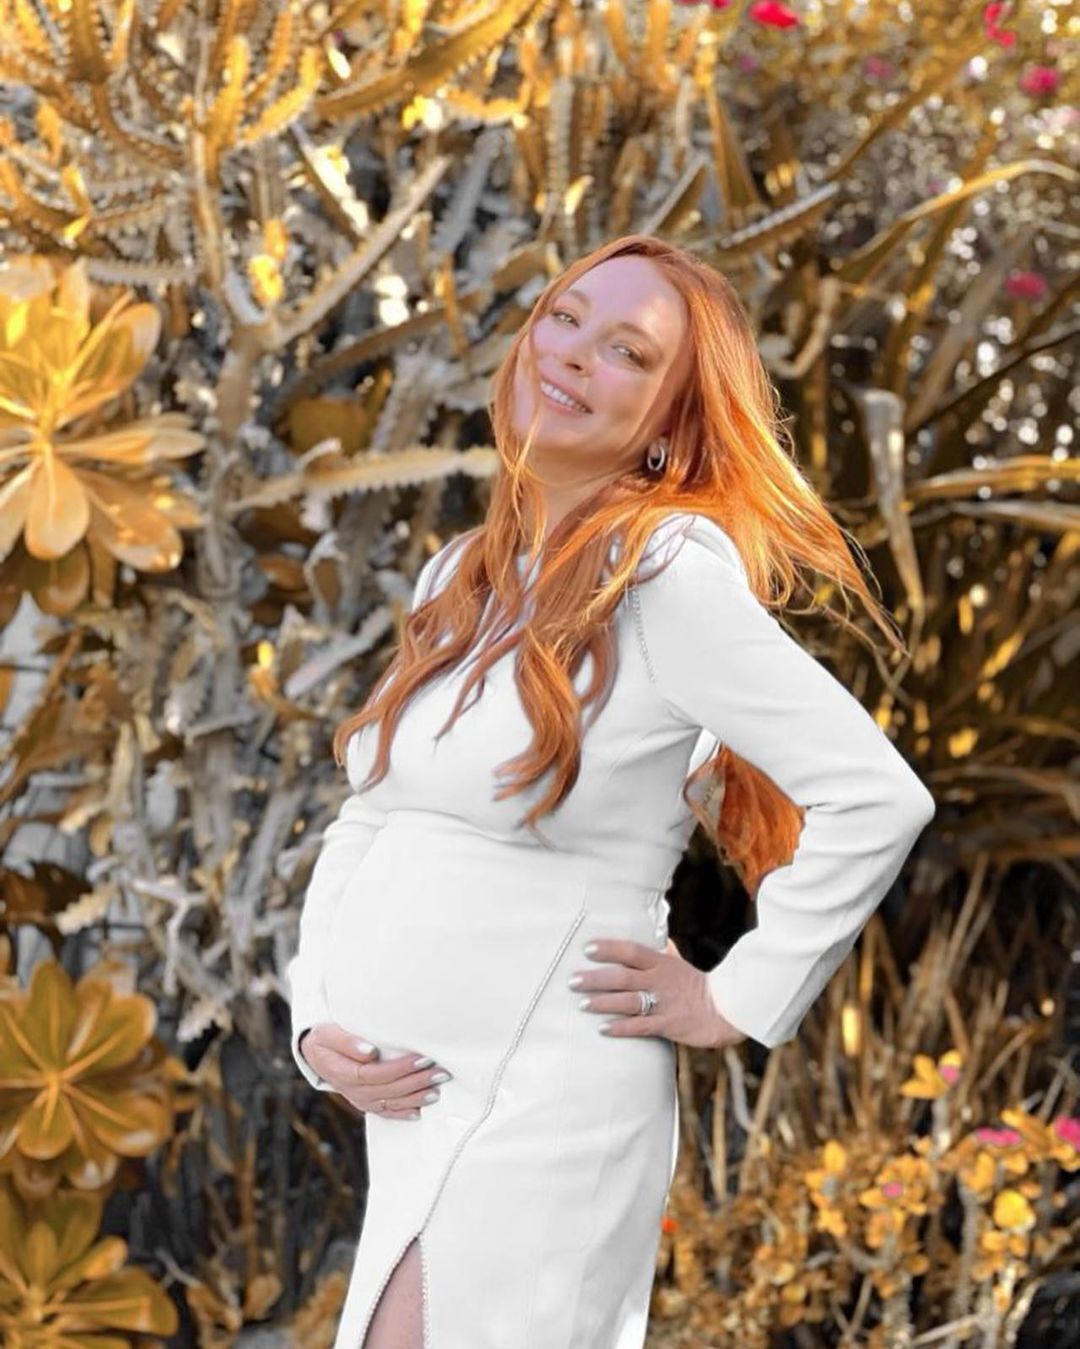 Lindsay Lohan, 37, became a mother for the first time: her first child was given an unusual name